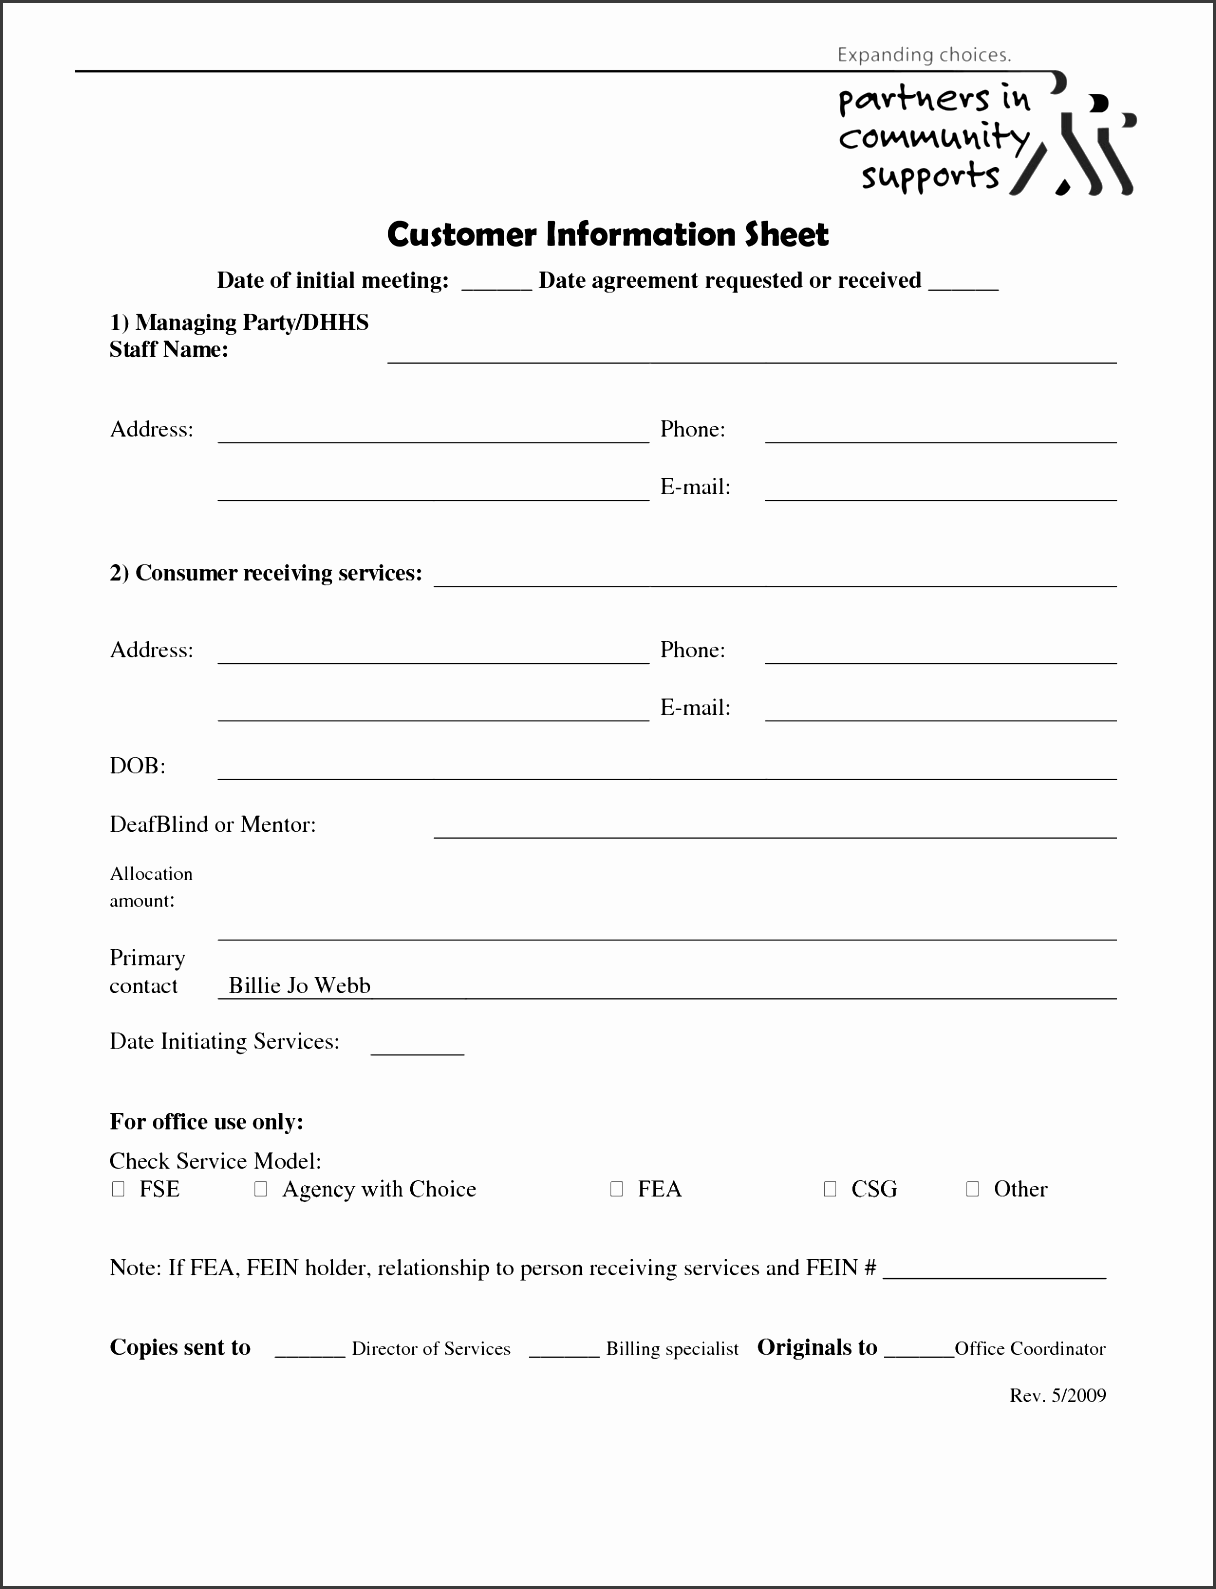 view and print client information sheets pdf template or form online 72 client information sheets are collected for any of your needs